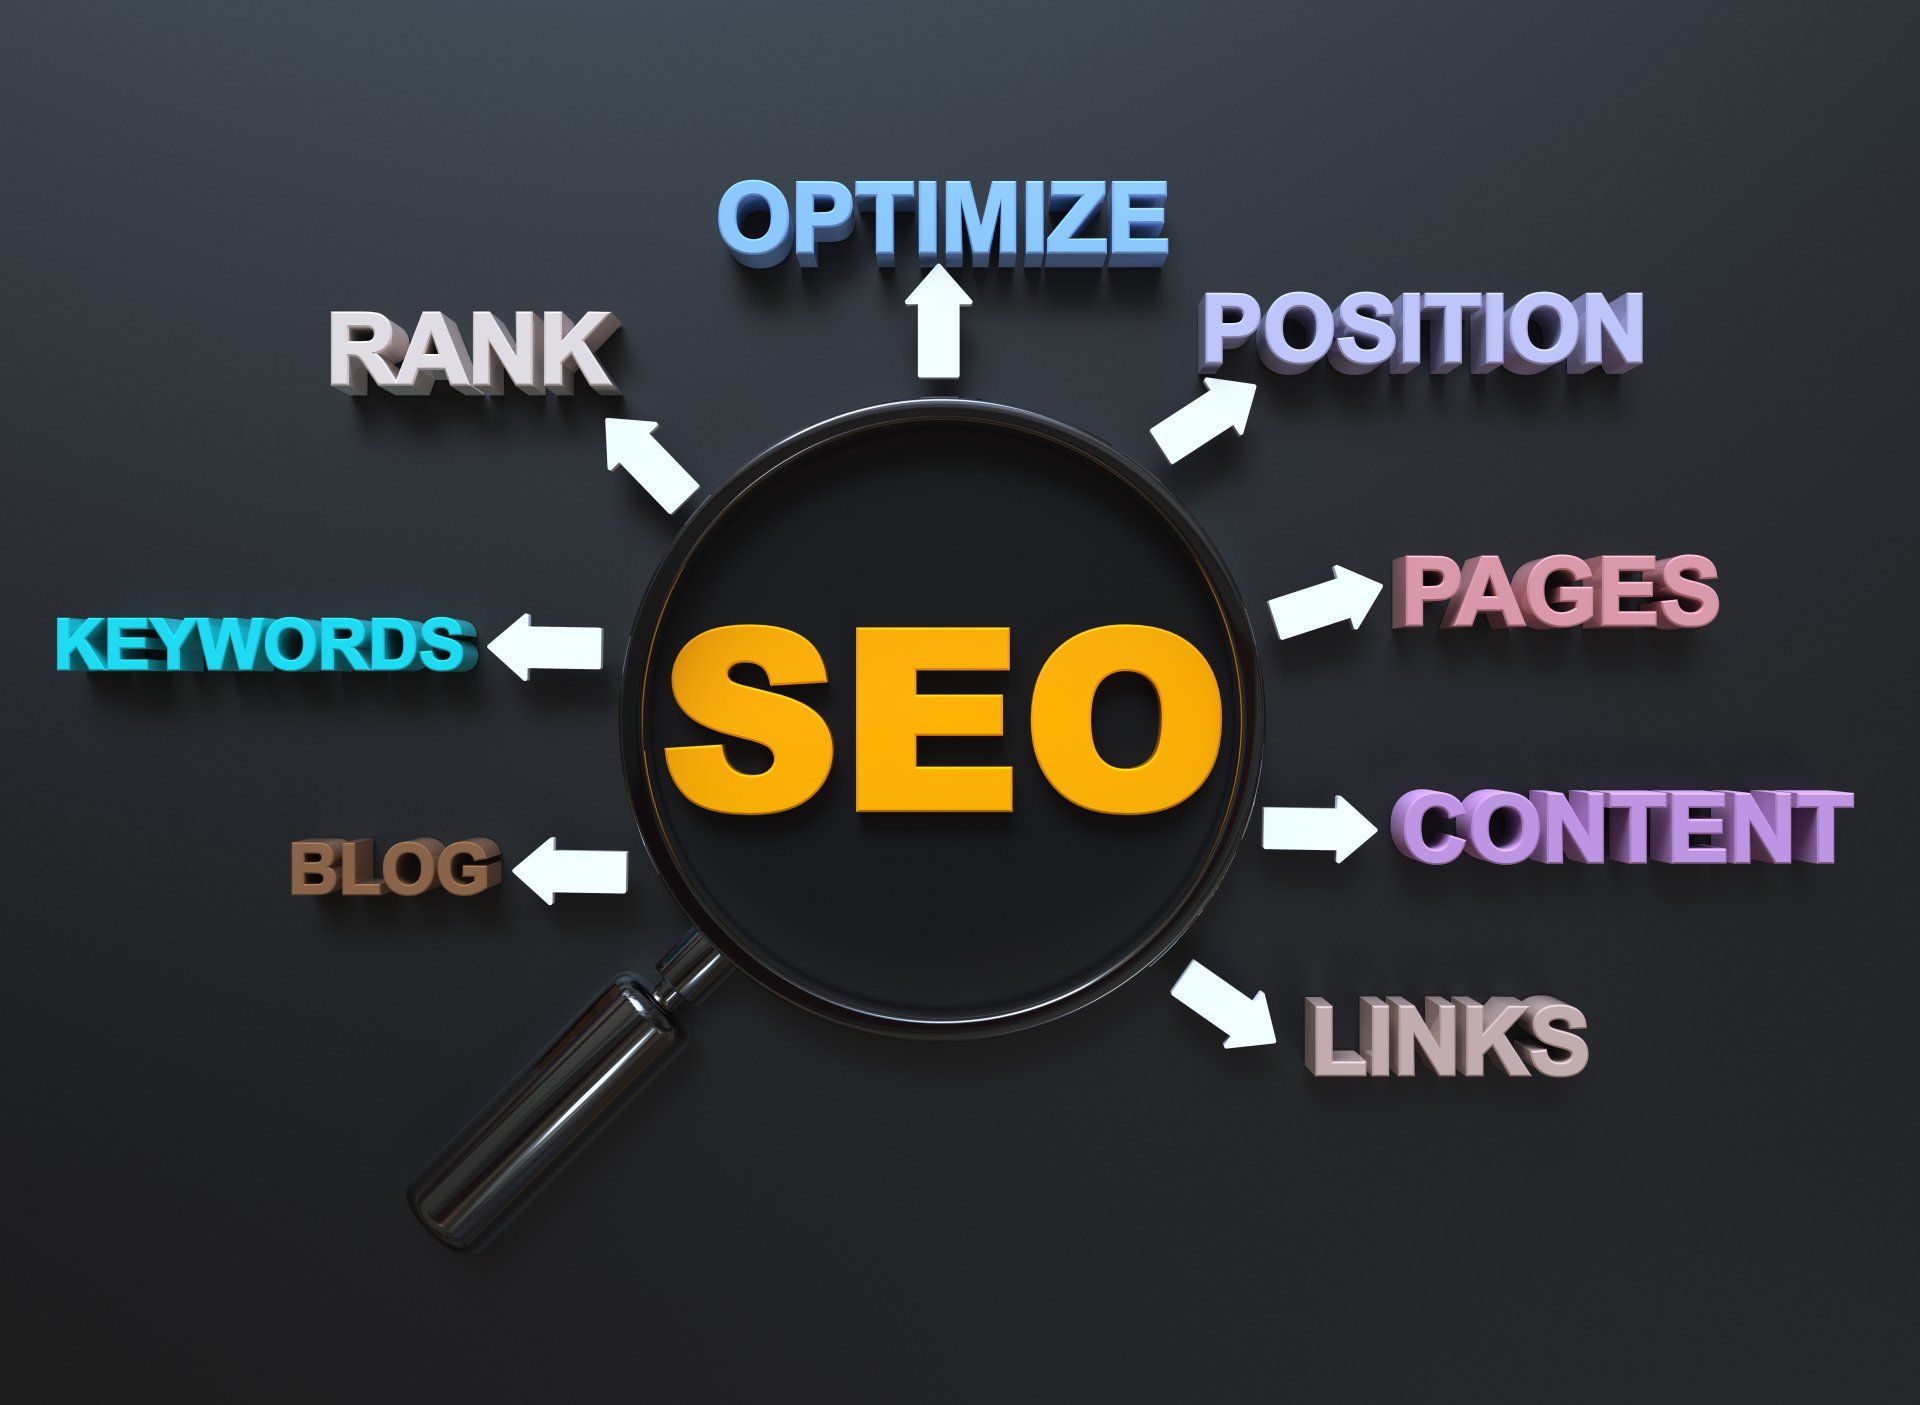 Rank Higher in Search Results by Having the Right Keyword Strategy for Your Business